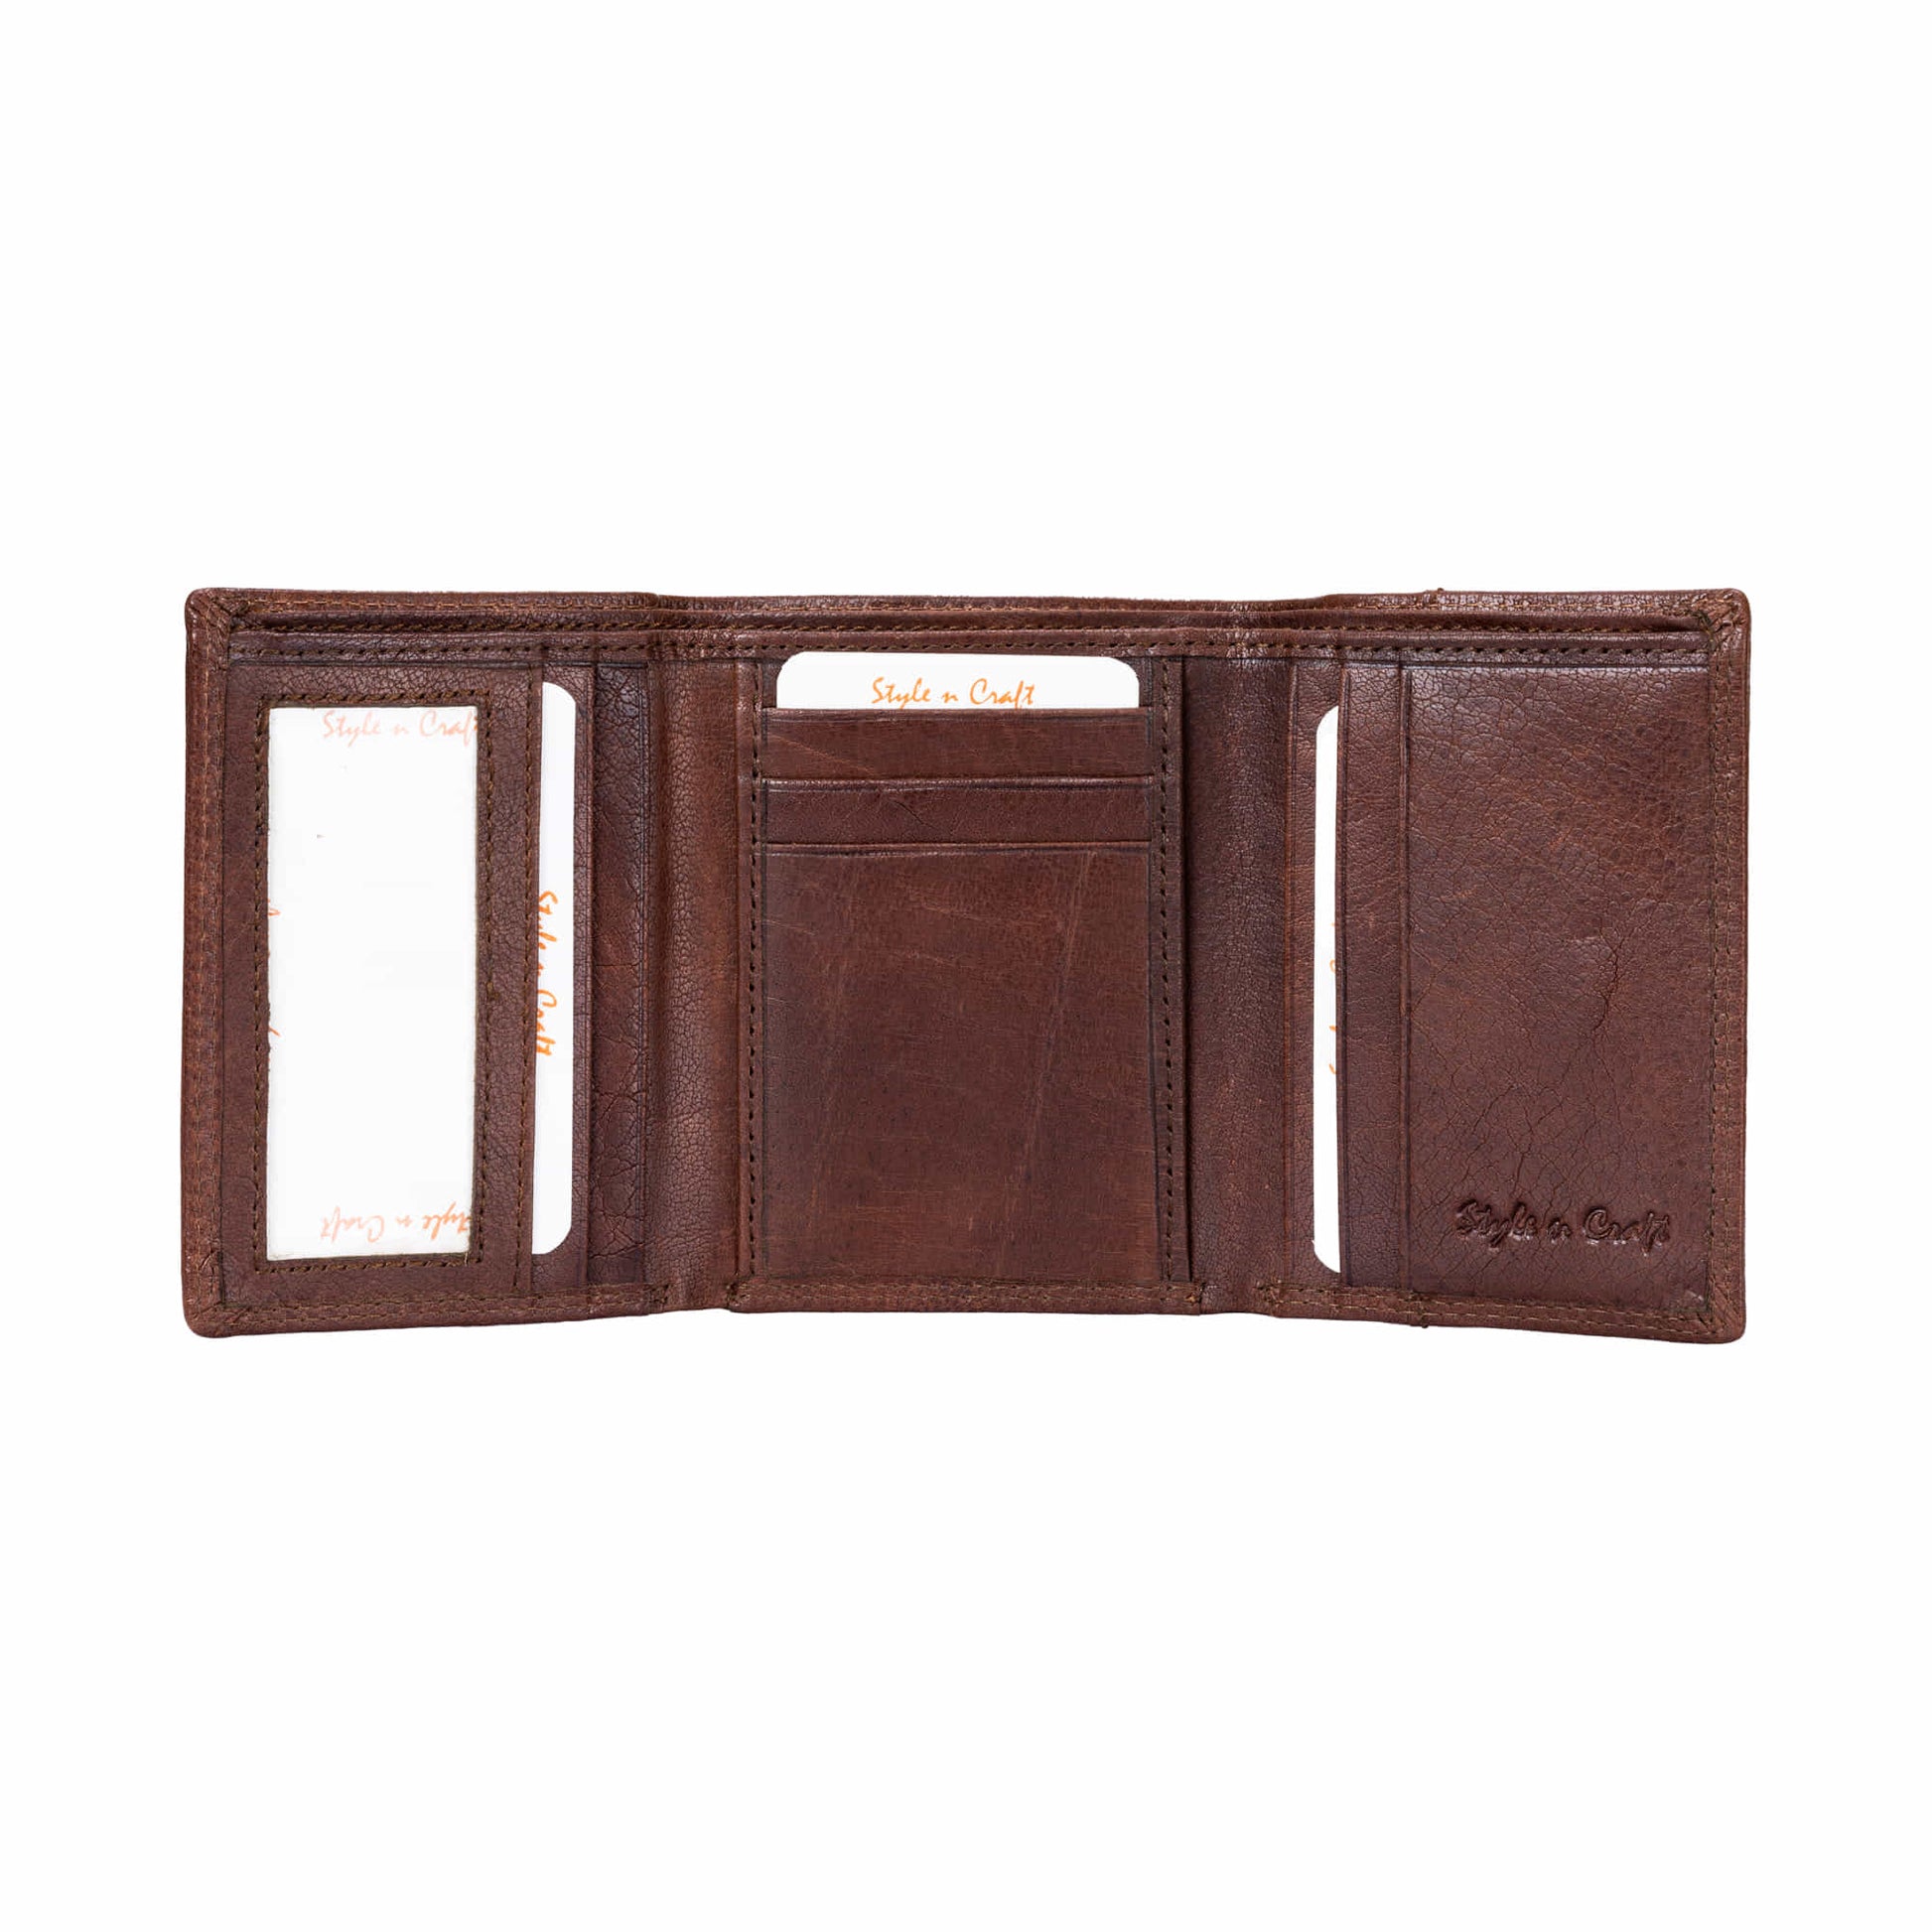 Style n Craft 301791 Trifold Wallet in Vintage Full Grain Leather - brown color - inside open view of the wallet showing the credit card pockets & the ID window